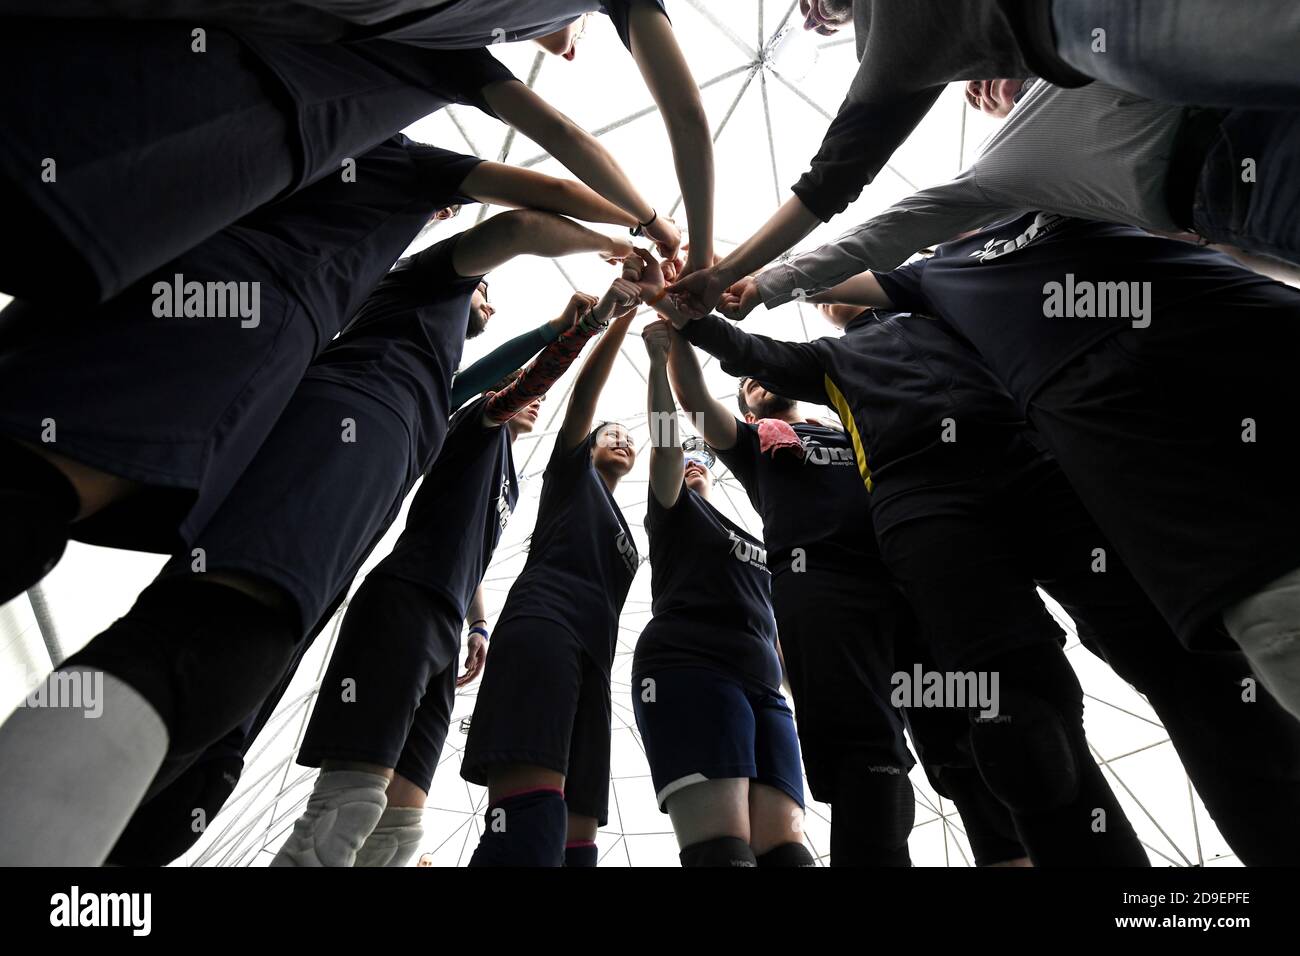 Female and male teammates, supporting each other with holding hands in a circle, during a tchouklball match, in Milan. Stock Photo